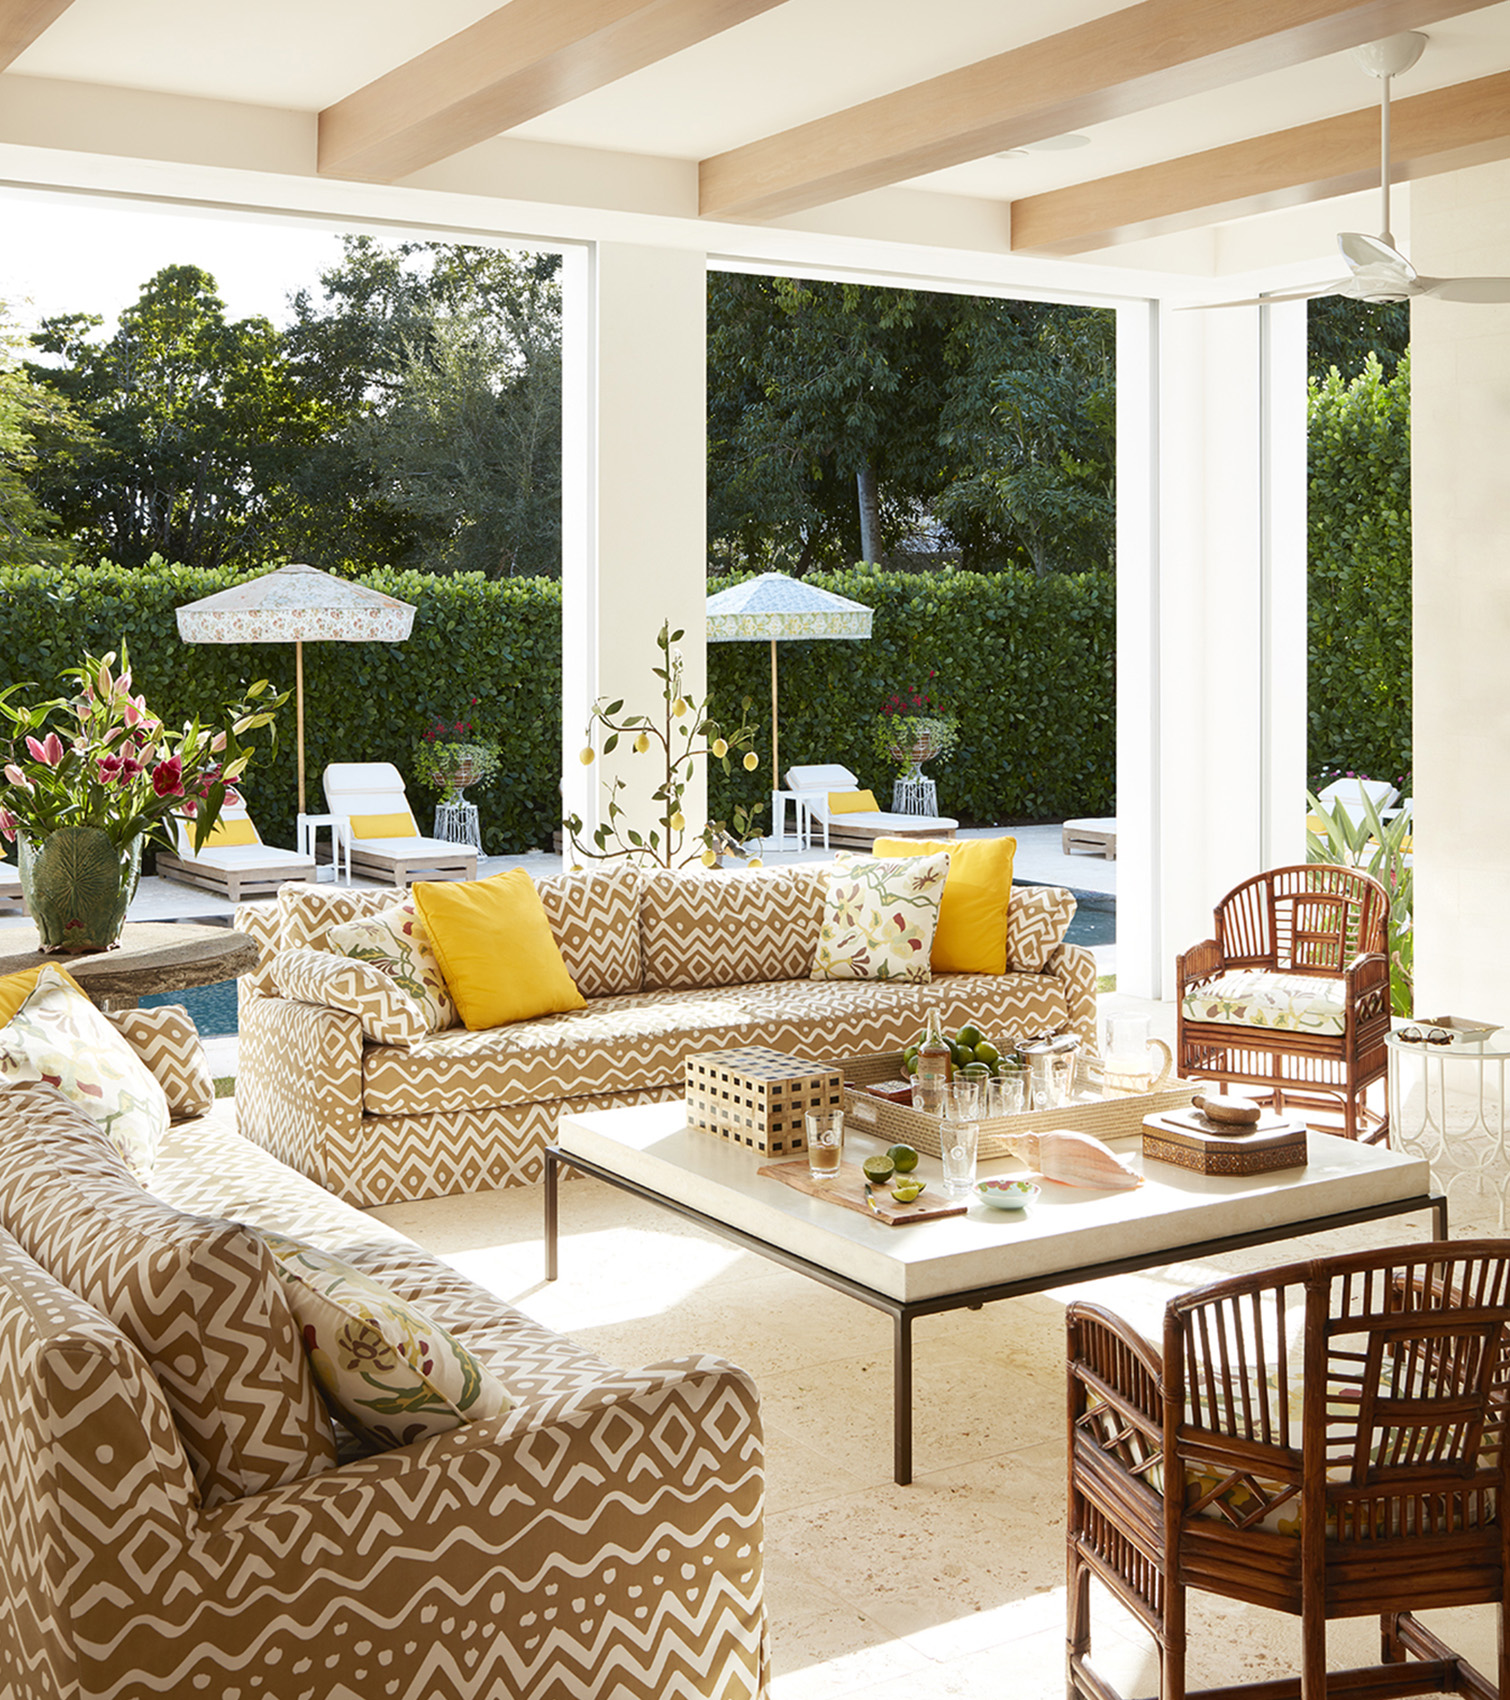 Interior design by Summer Thornton for this tropical lanai located in Old Naples, FL with colorful details